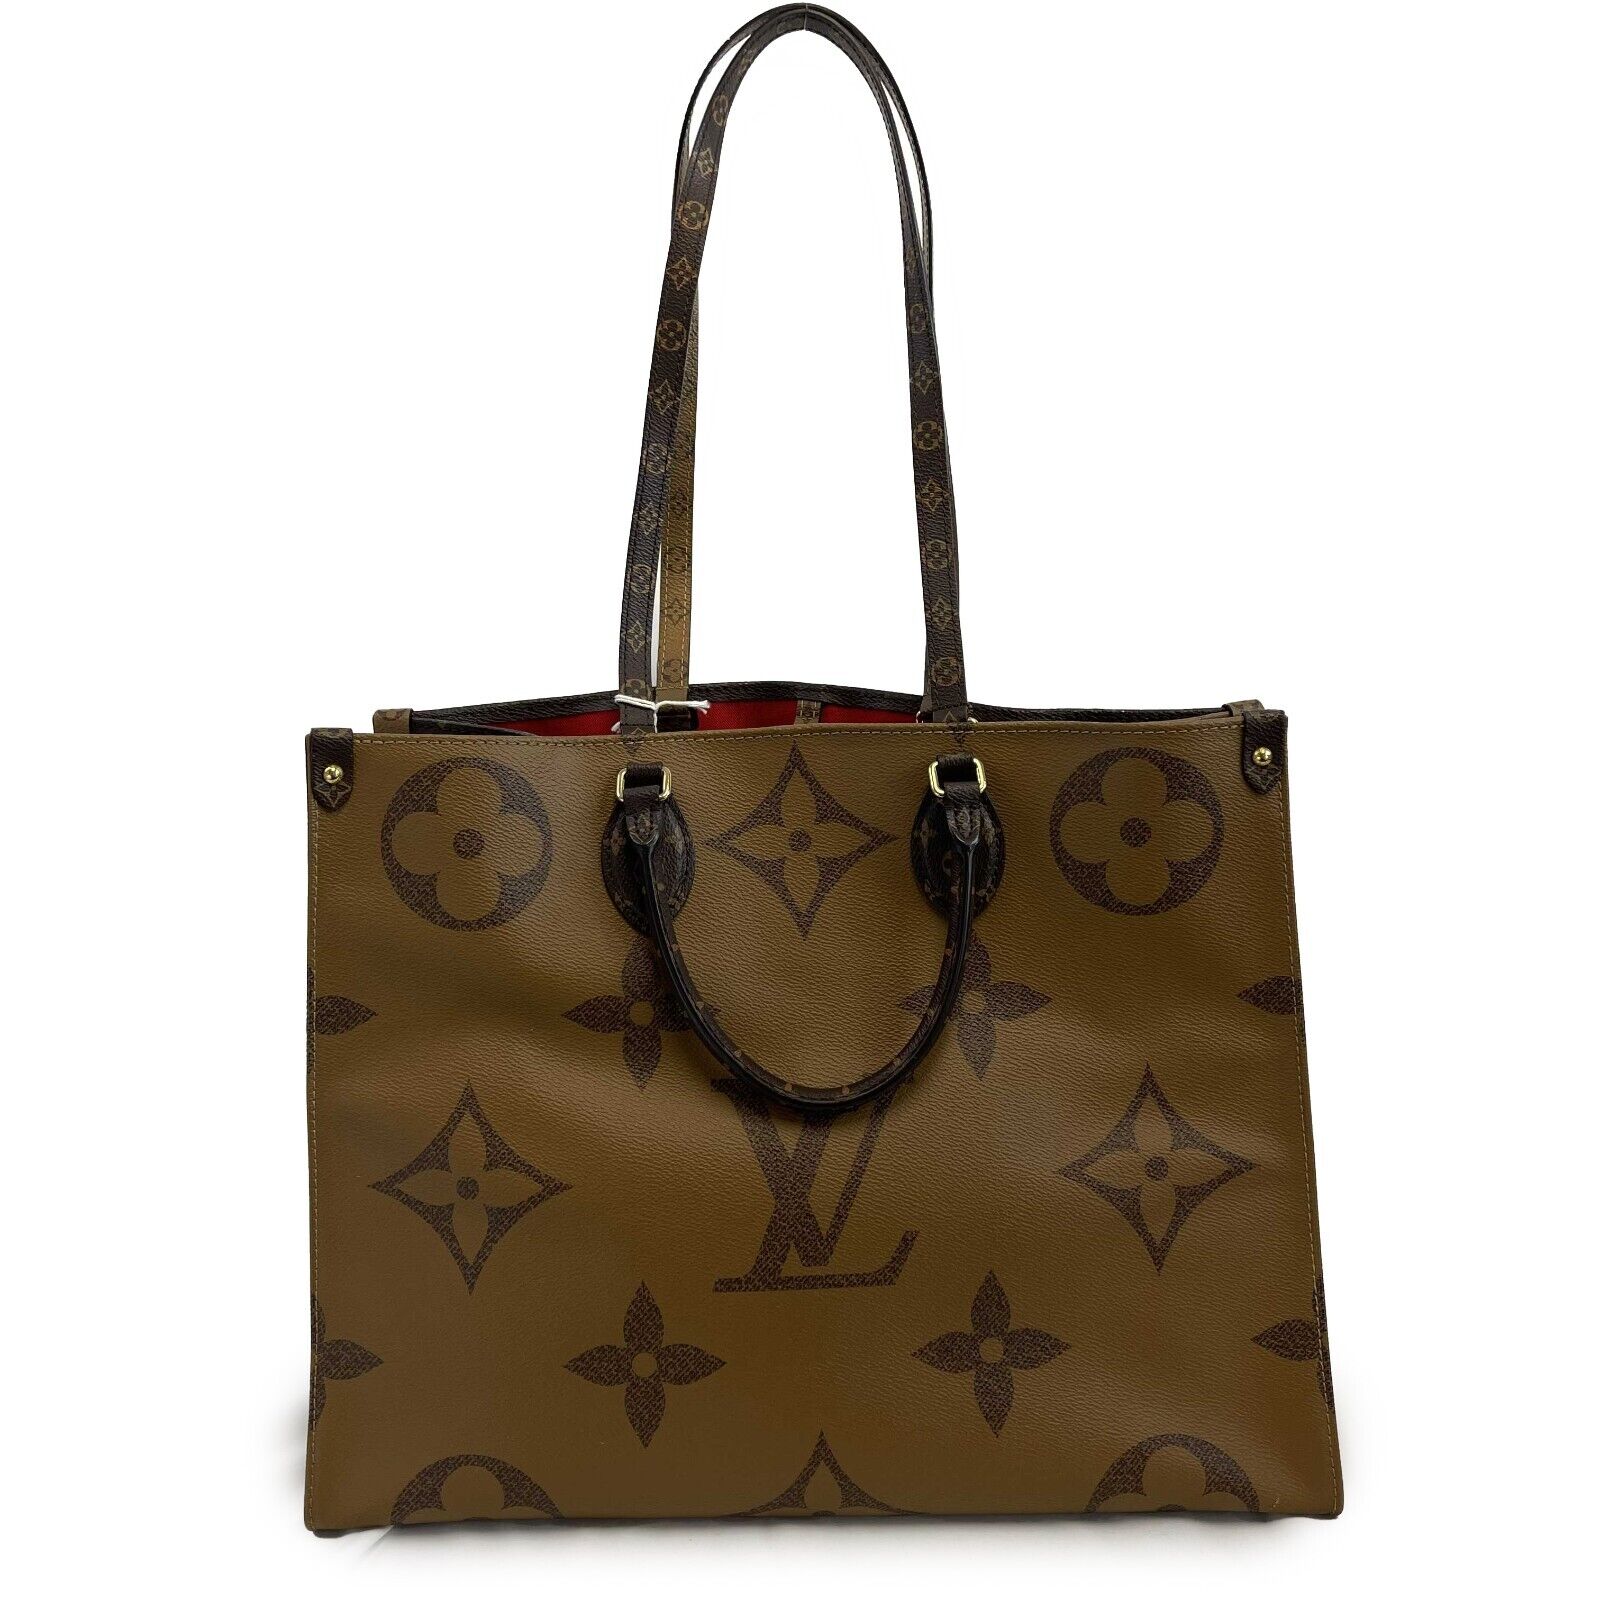 💝 LOUIS VUITTON MOST WANTED BAG OF 2023 ONTHEGO PM ON THE GO MOD SHOTS &  REVIEW WITH OTHER STRAP 